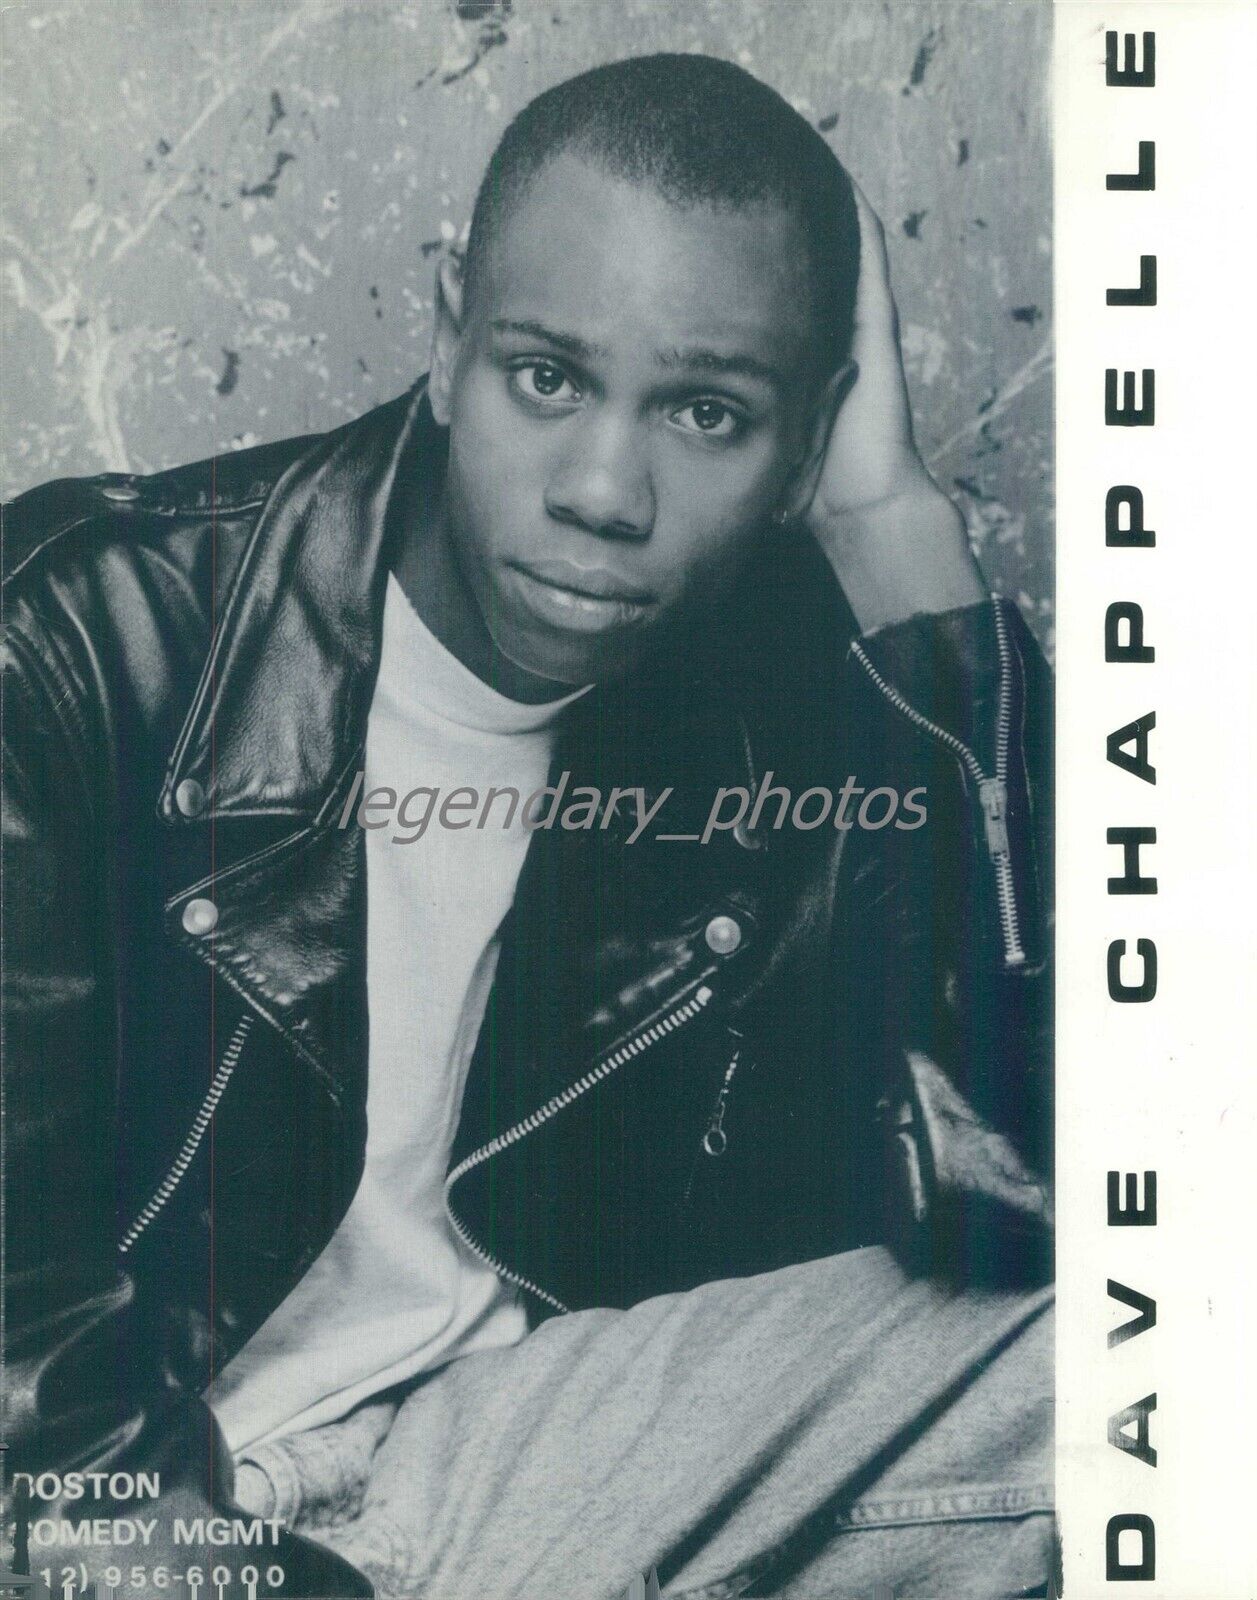 1992 Portrait of Actor and Comedian Dave Chappelle Original News Service Photo